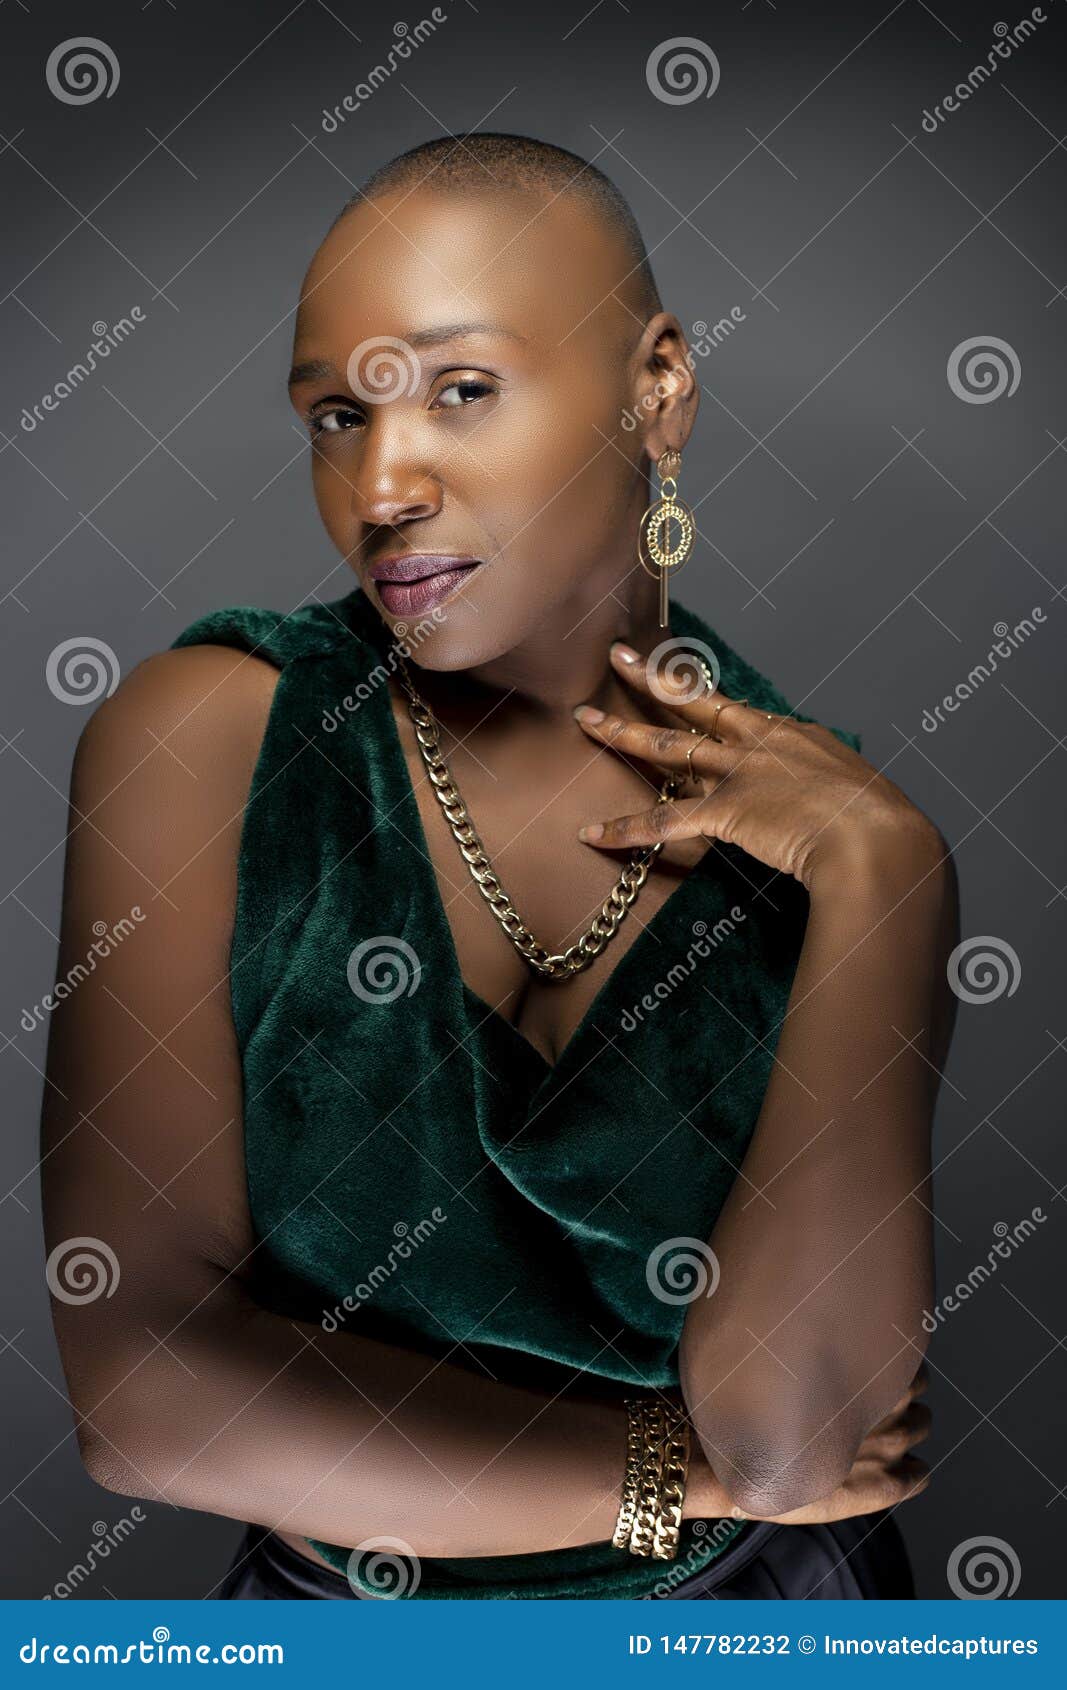 Black Female Fashion Model With Bald Hairstyle Lookin